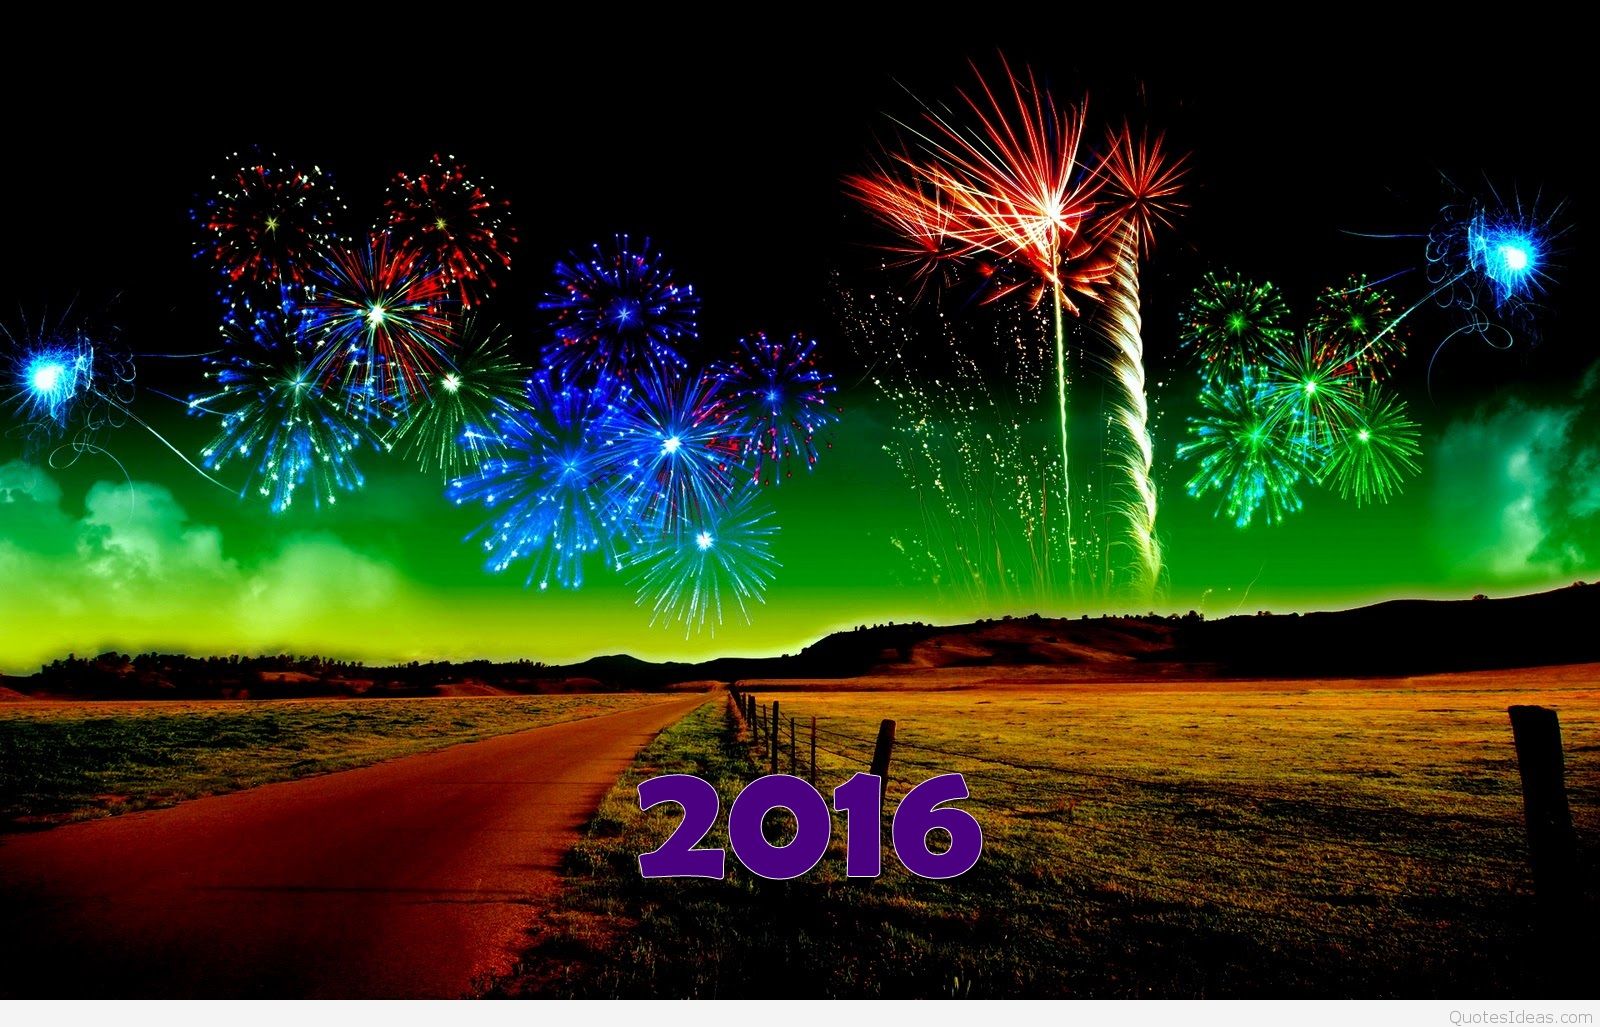 Happy New Year Fireworks Wallpaper Holidays